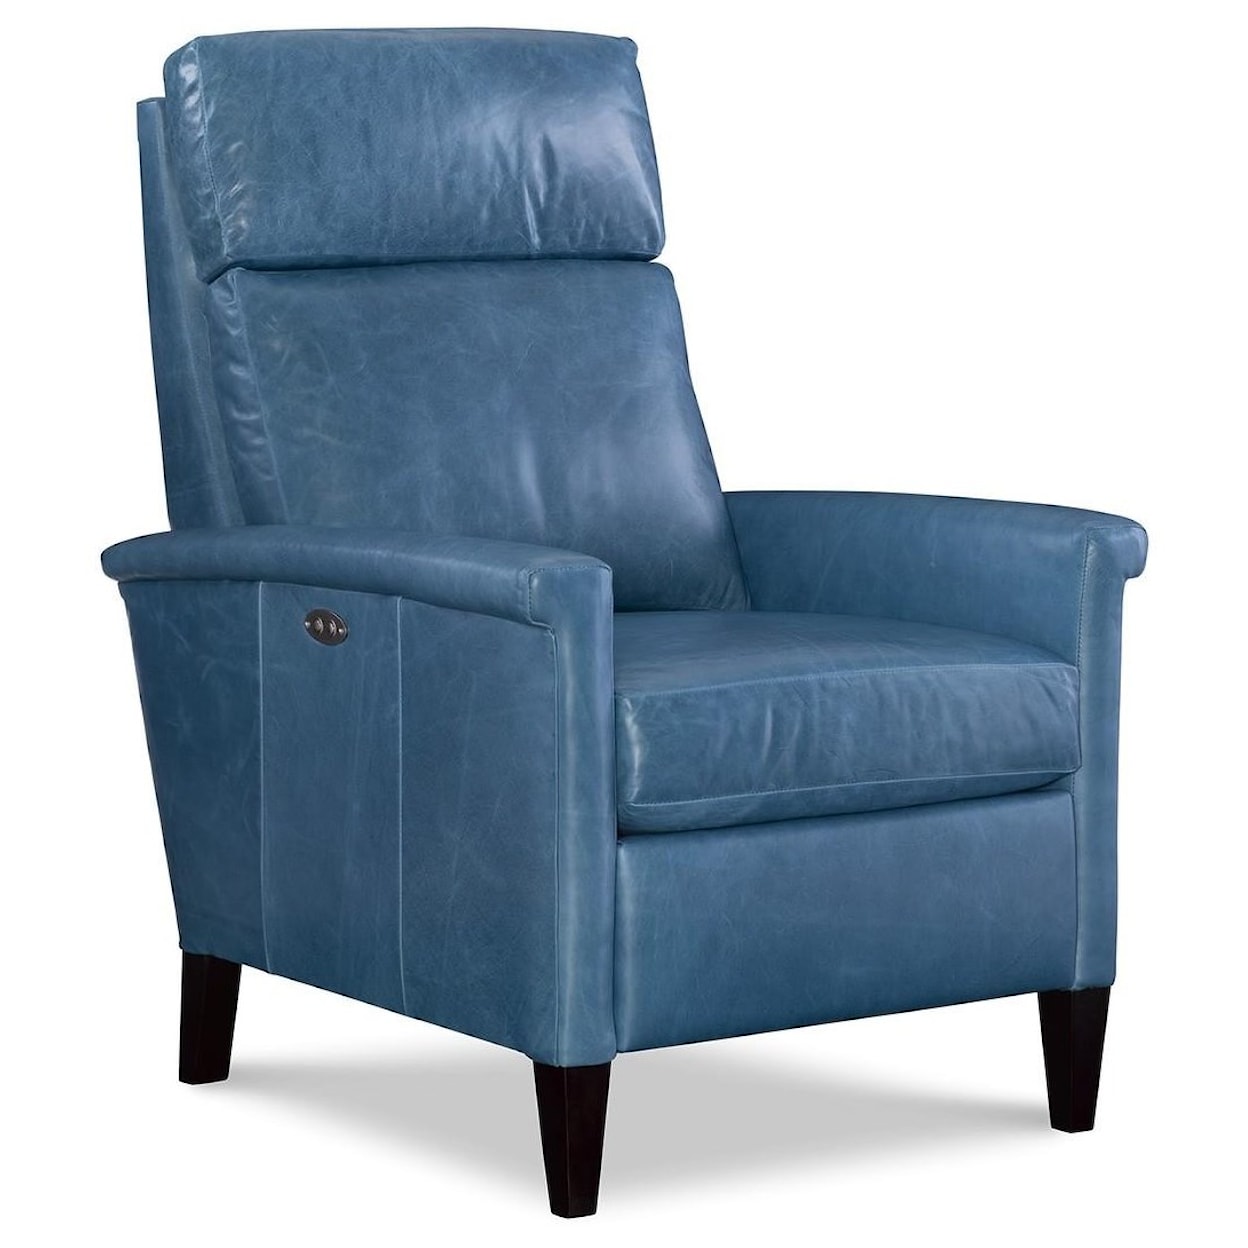 C.R. Laine Chairs and Chaises Noah Leather Power Recliner